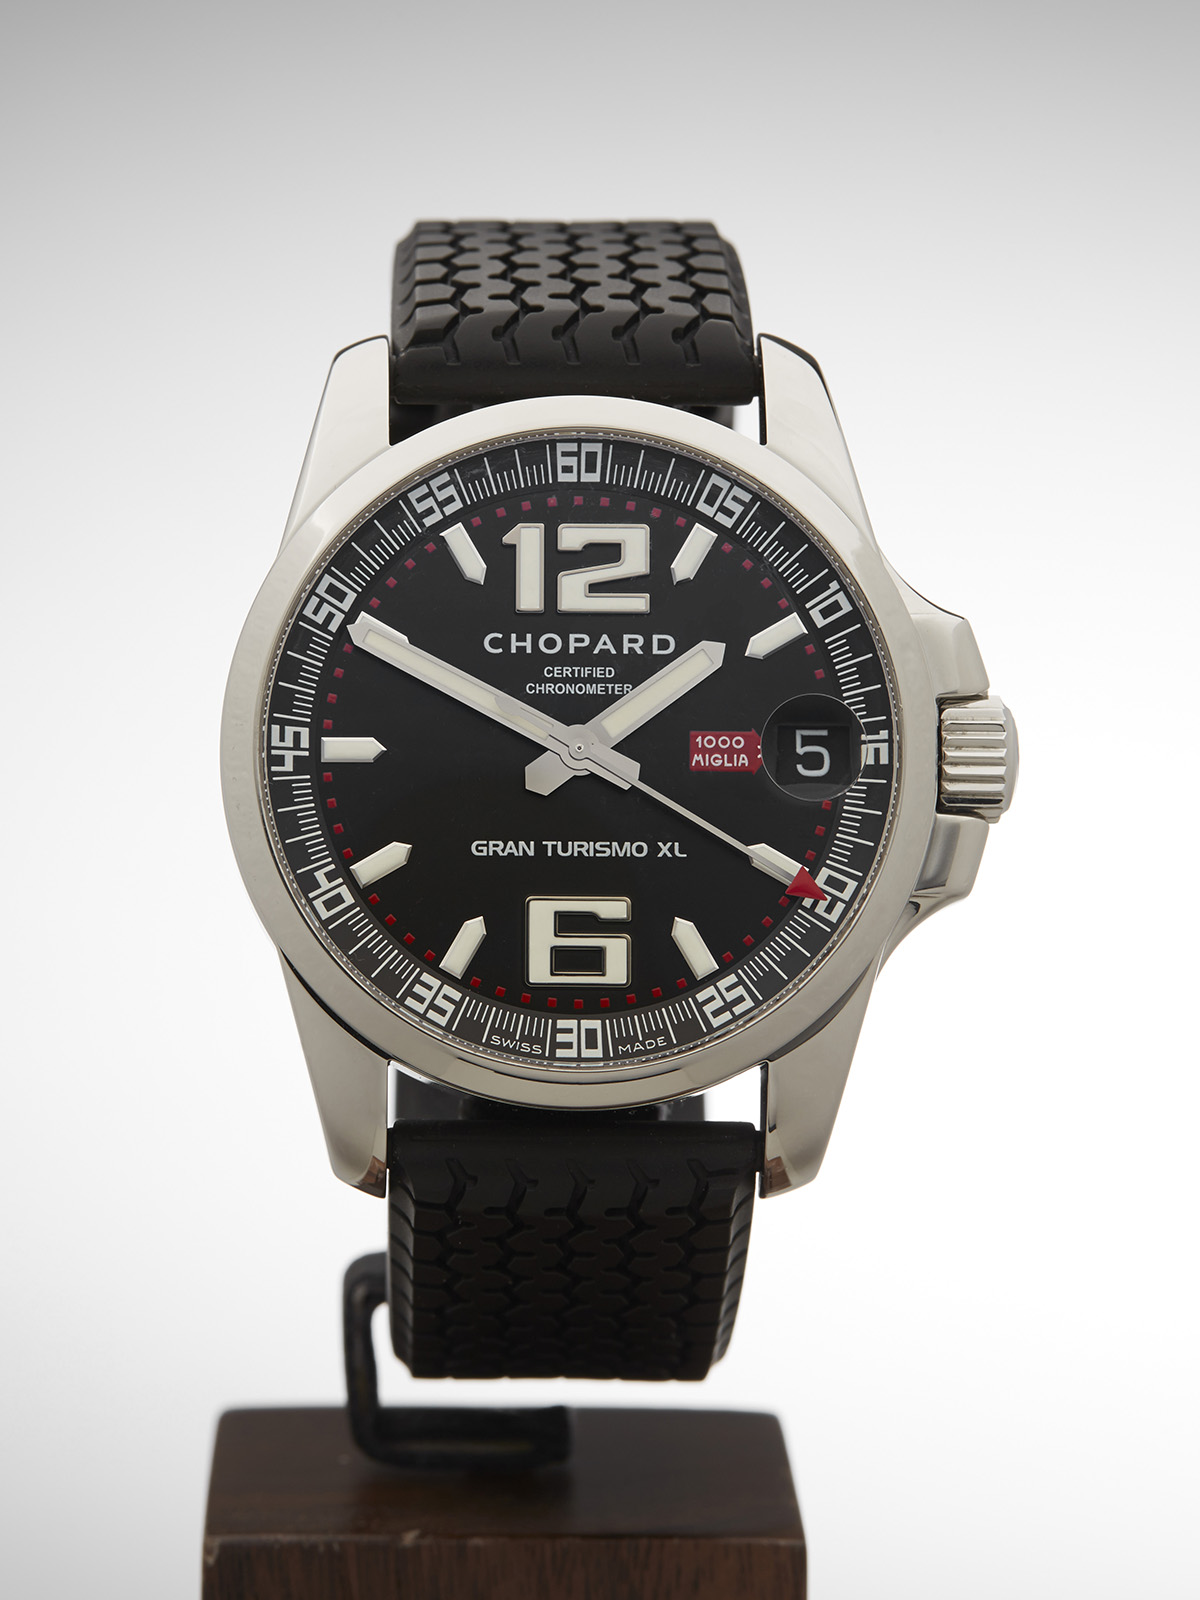 Chopard Mille Miglia Mille Miglia GT XL 45mm Stainless Steel 8997 or 16-8997-3001 - Image 4 of 10